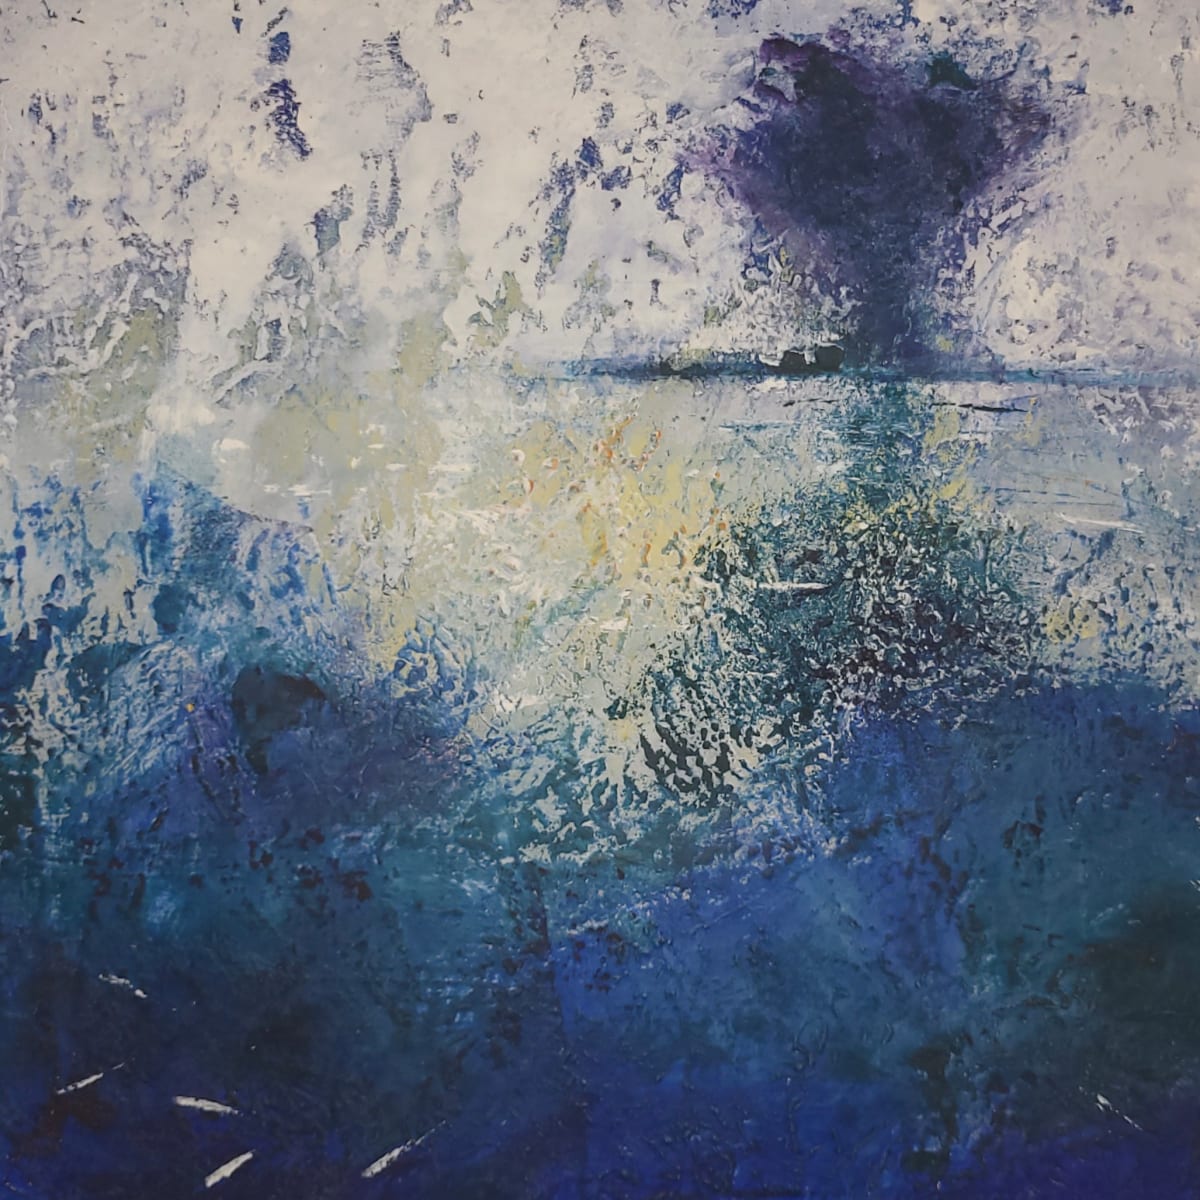 Iridescent Blue Ice by Cara Lawson-Ball  Image: Oil and cold wax abstracted landscape of impending northern winters